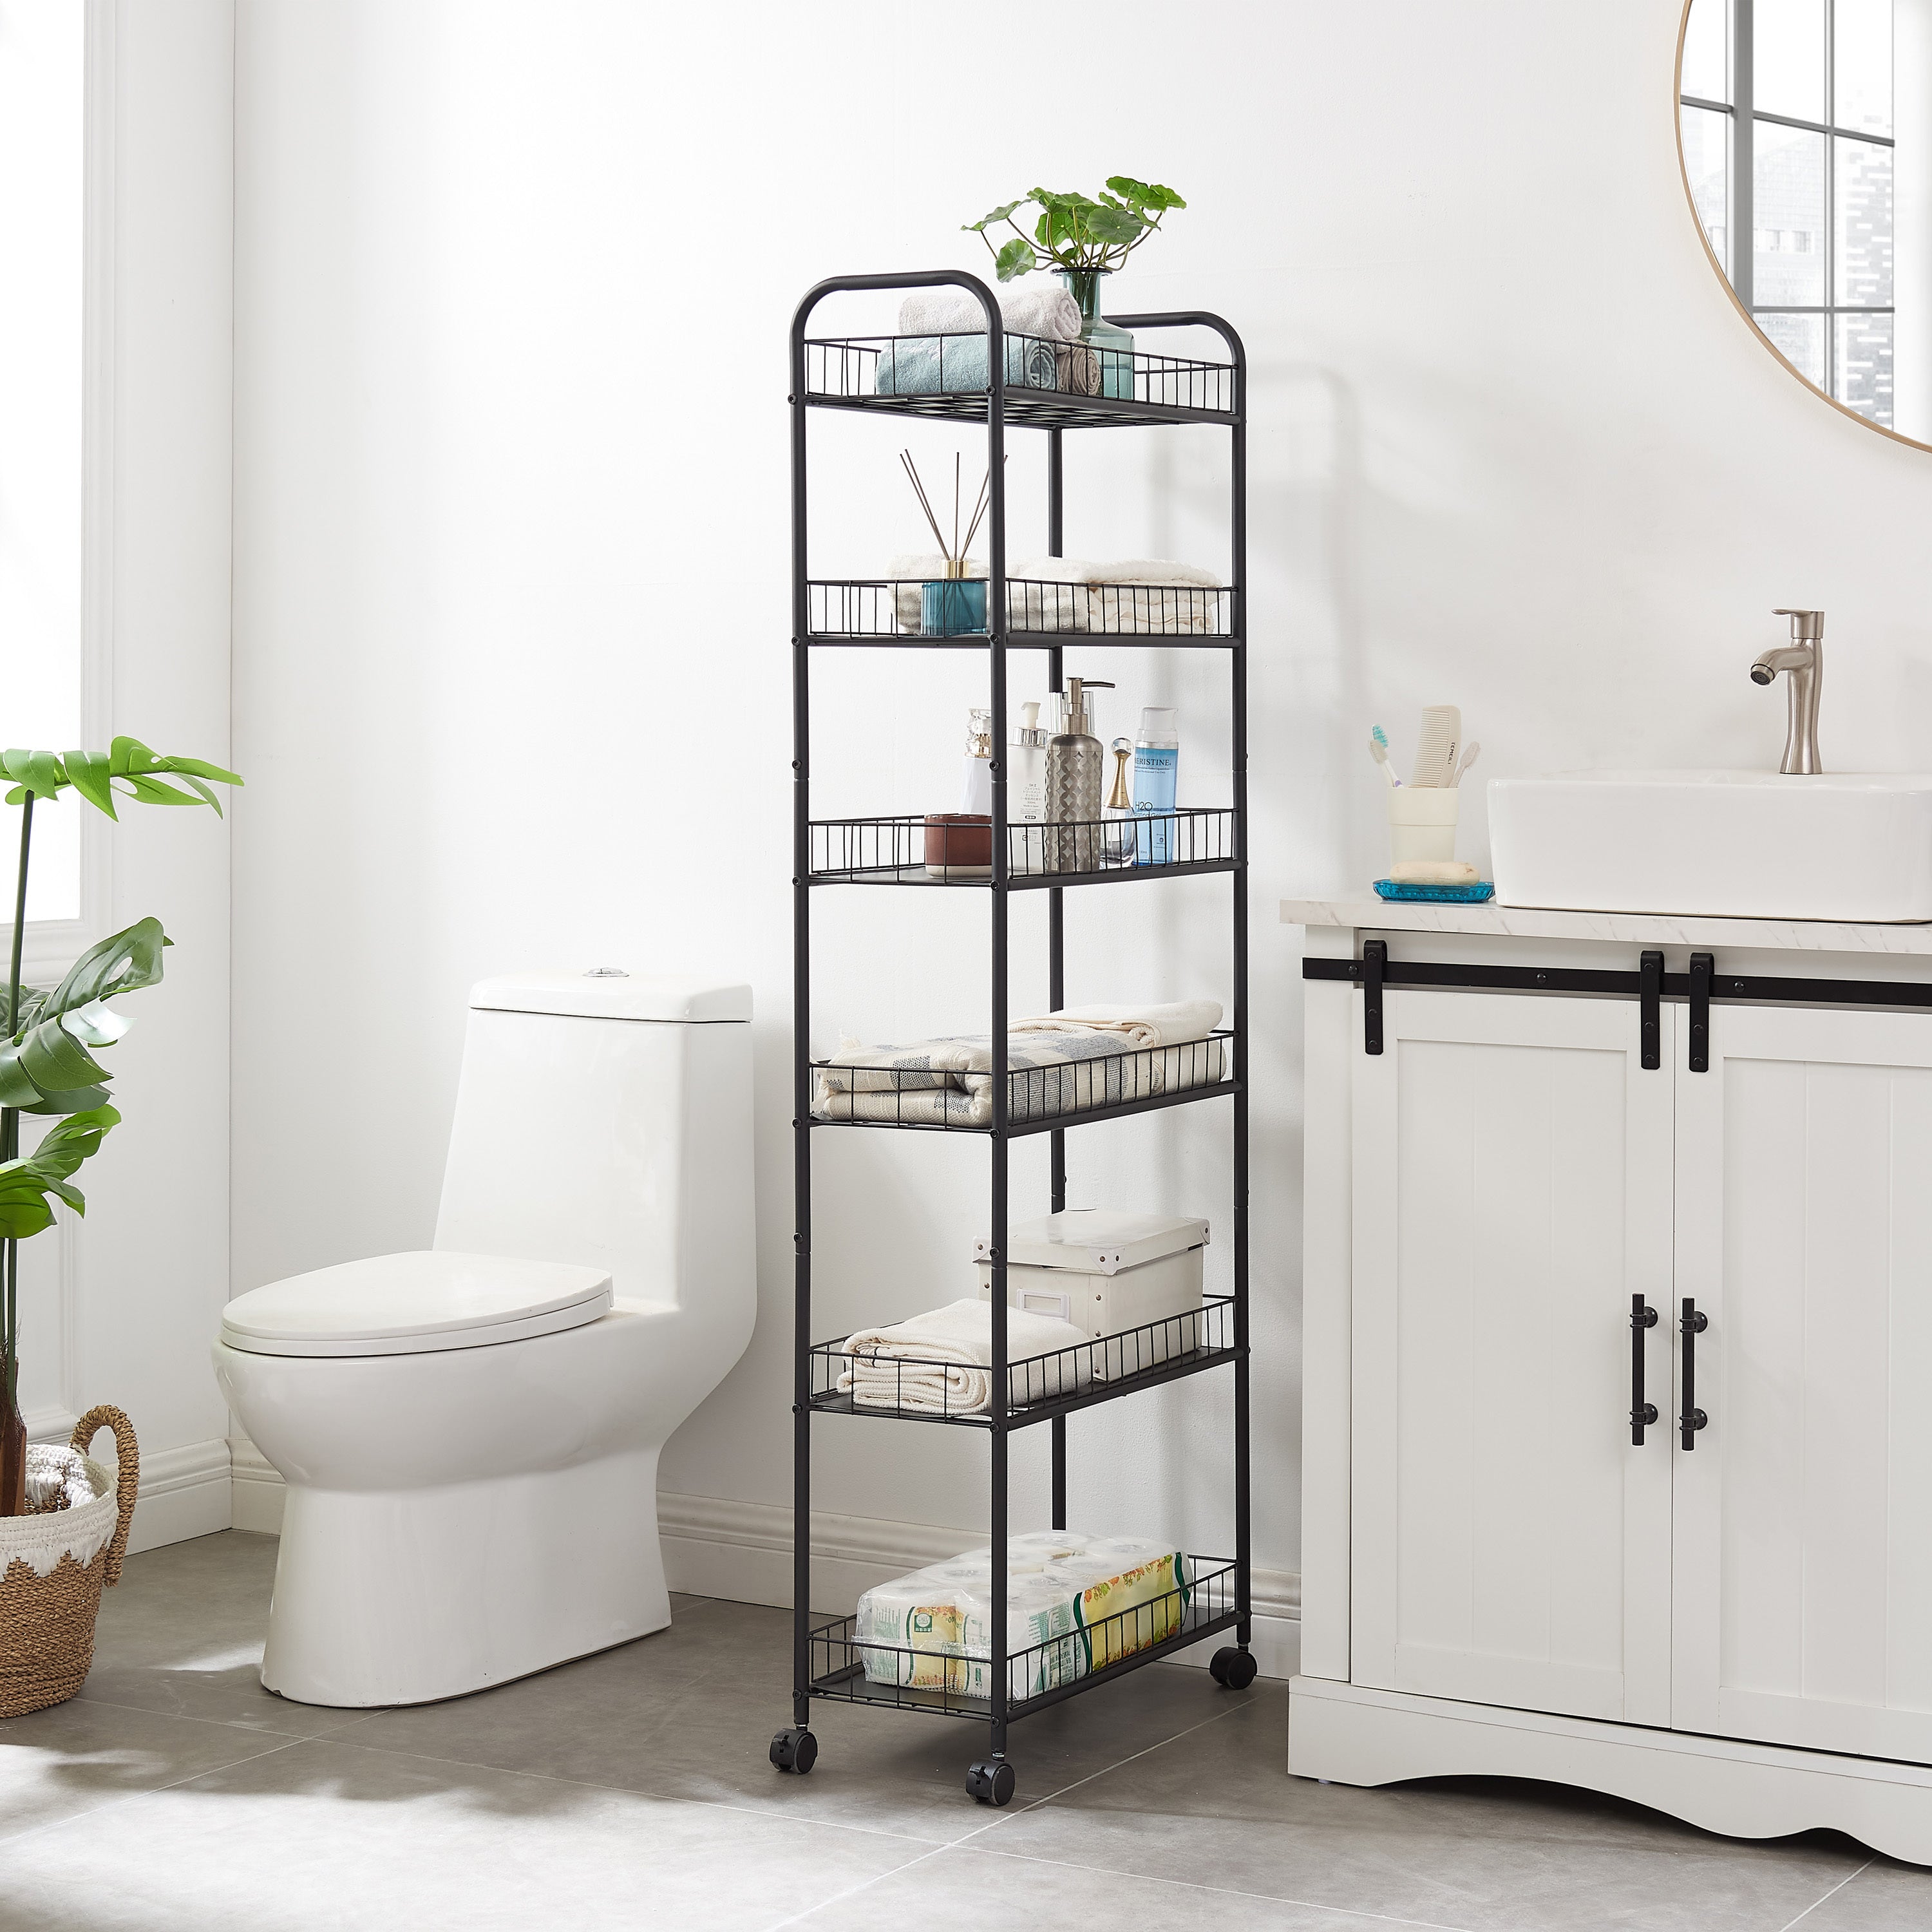 🆓🚛 6 Tier Slim Rolling Storage Cart, Mobile Shelving Unit With Wheels, Metal Wire Storage Shelving Rack With Baskets for Kitchen Bathroom Office Laundry Narrow Piaces